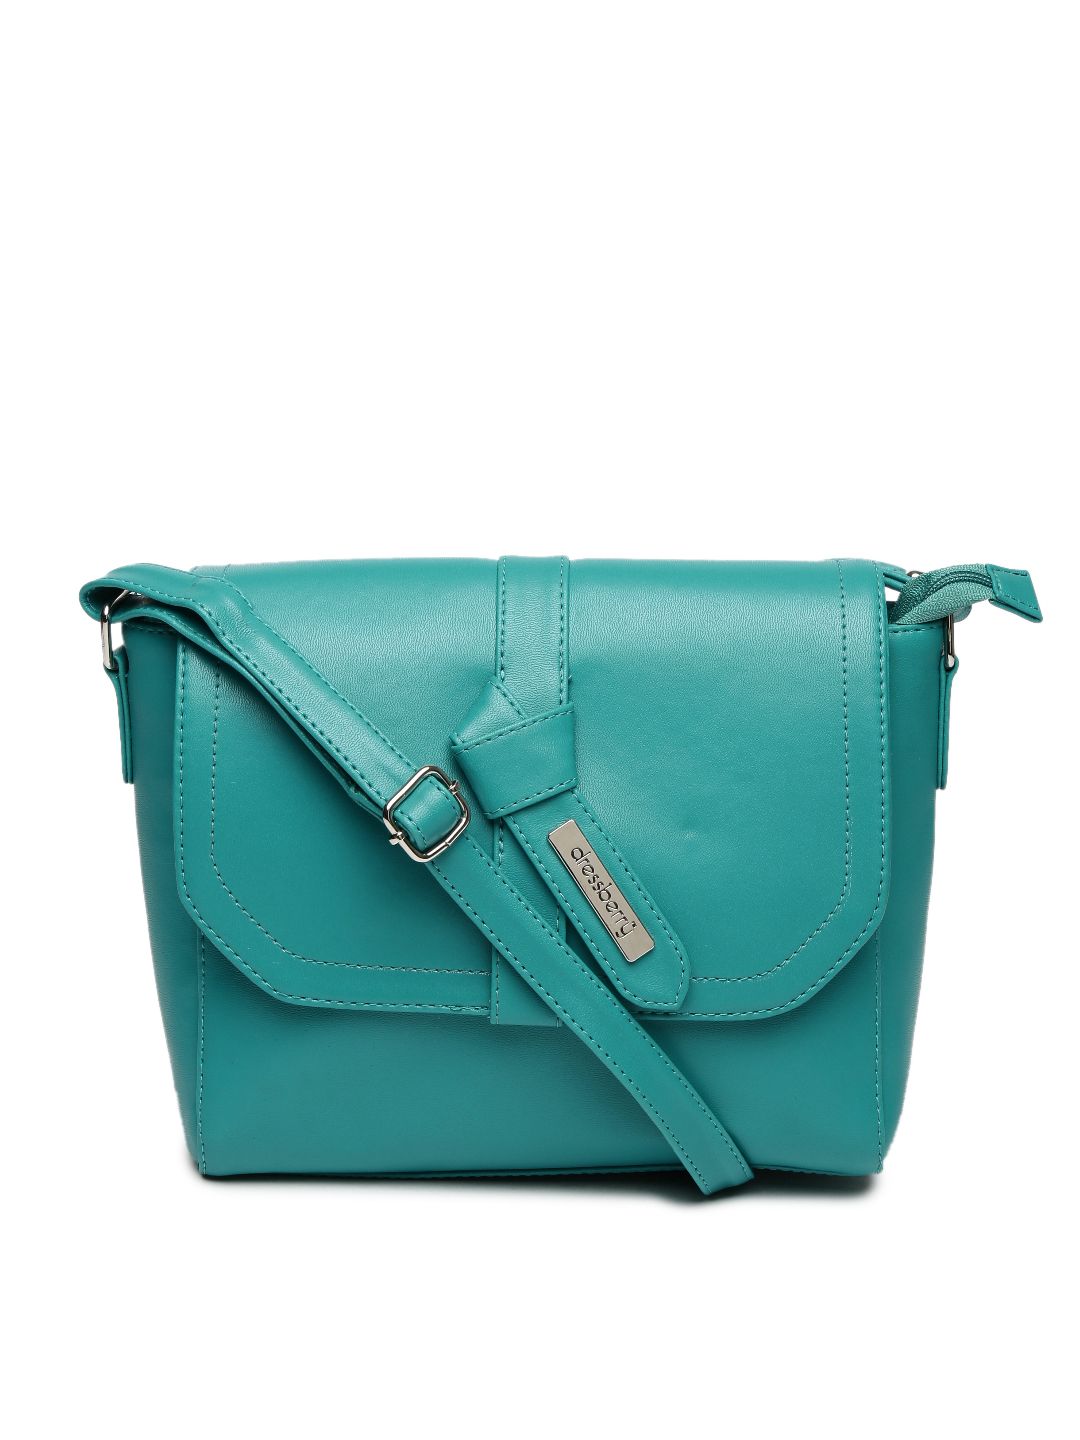 DressBerry Green Sling Bag Price in India